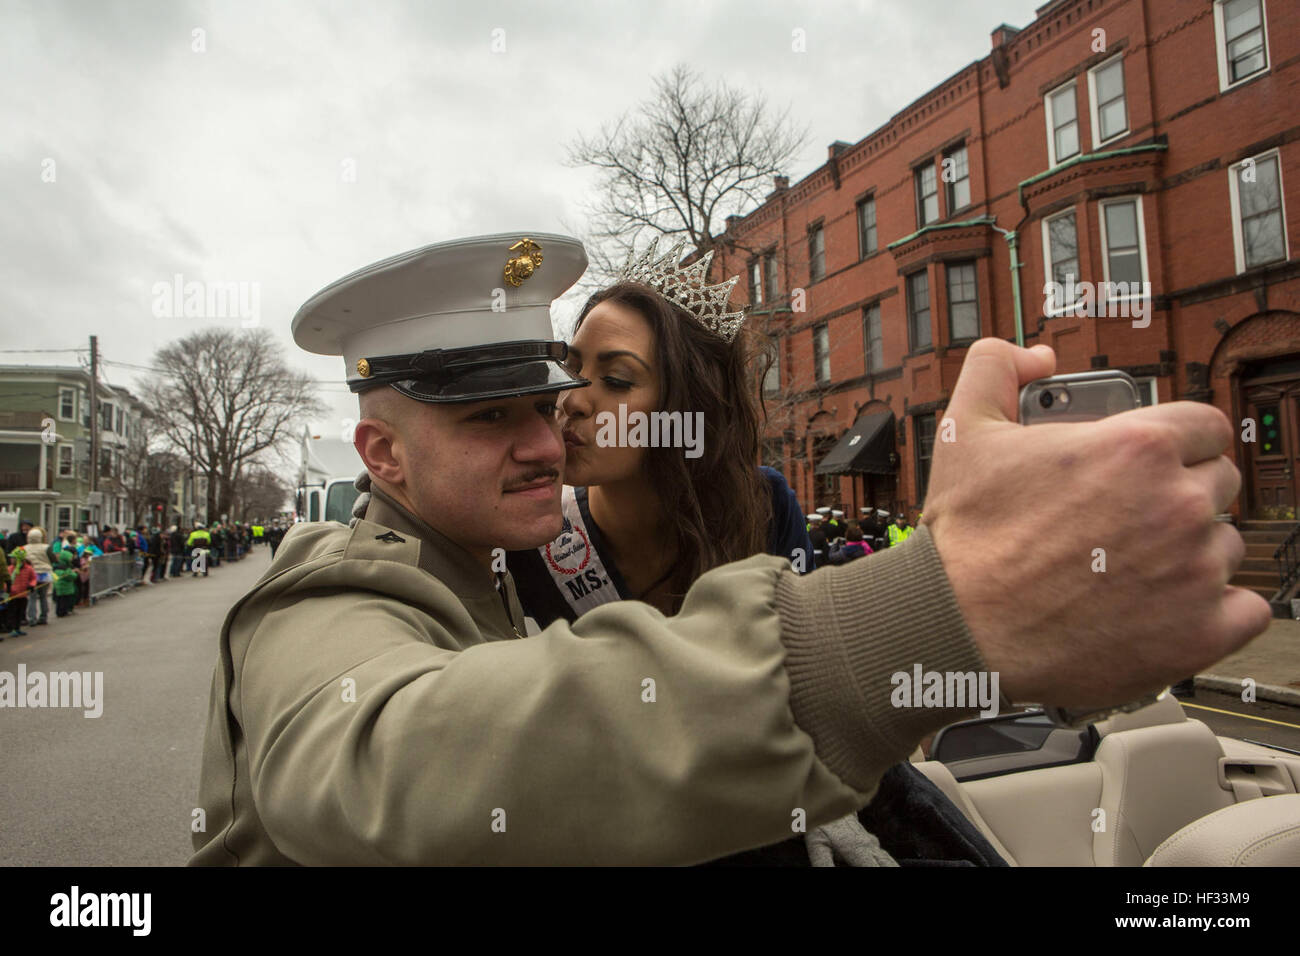 U.S. Marines with Marine Corps Forces Command, 2D Marine Logistics Group, and 2D Marine Division, participate in the South Boston Allied War Veteran's Council St. Patrick's Day parade, South Boston, Massachusetts, March 16, 2015. The Marines arrived via the USS Arlington (LPD-24) amphibious transport dock ship from Norfolk, Virginia, to South Boston to conduct tours aboard the ship to the general public and to participate in community relations events. (U.S. Marine Corps photo by Cpl. Desire M. Mora/ Released) U.S. Marines march in the South Boston Allied War Veteran's Council St. Patrick's Da Stock Photo